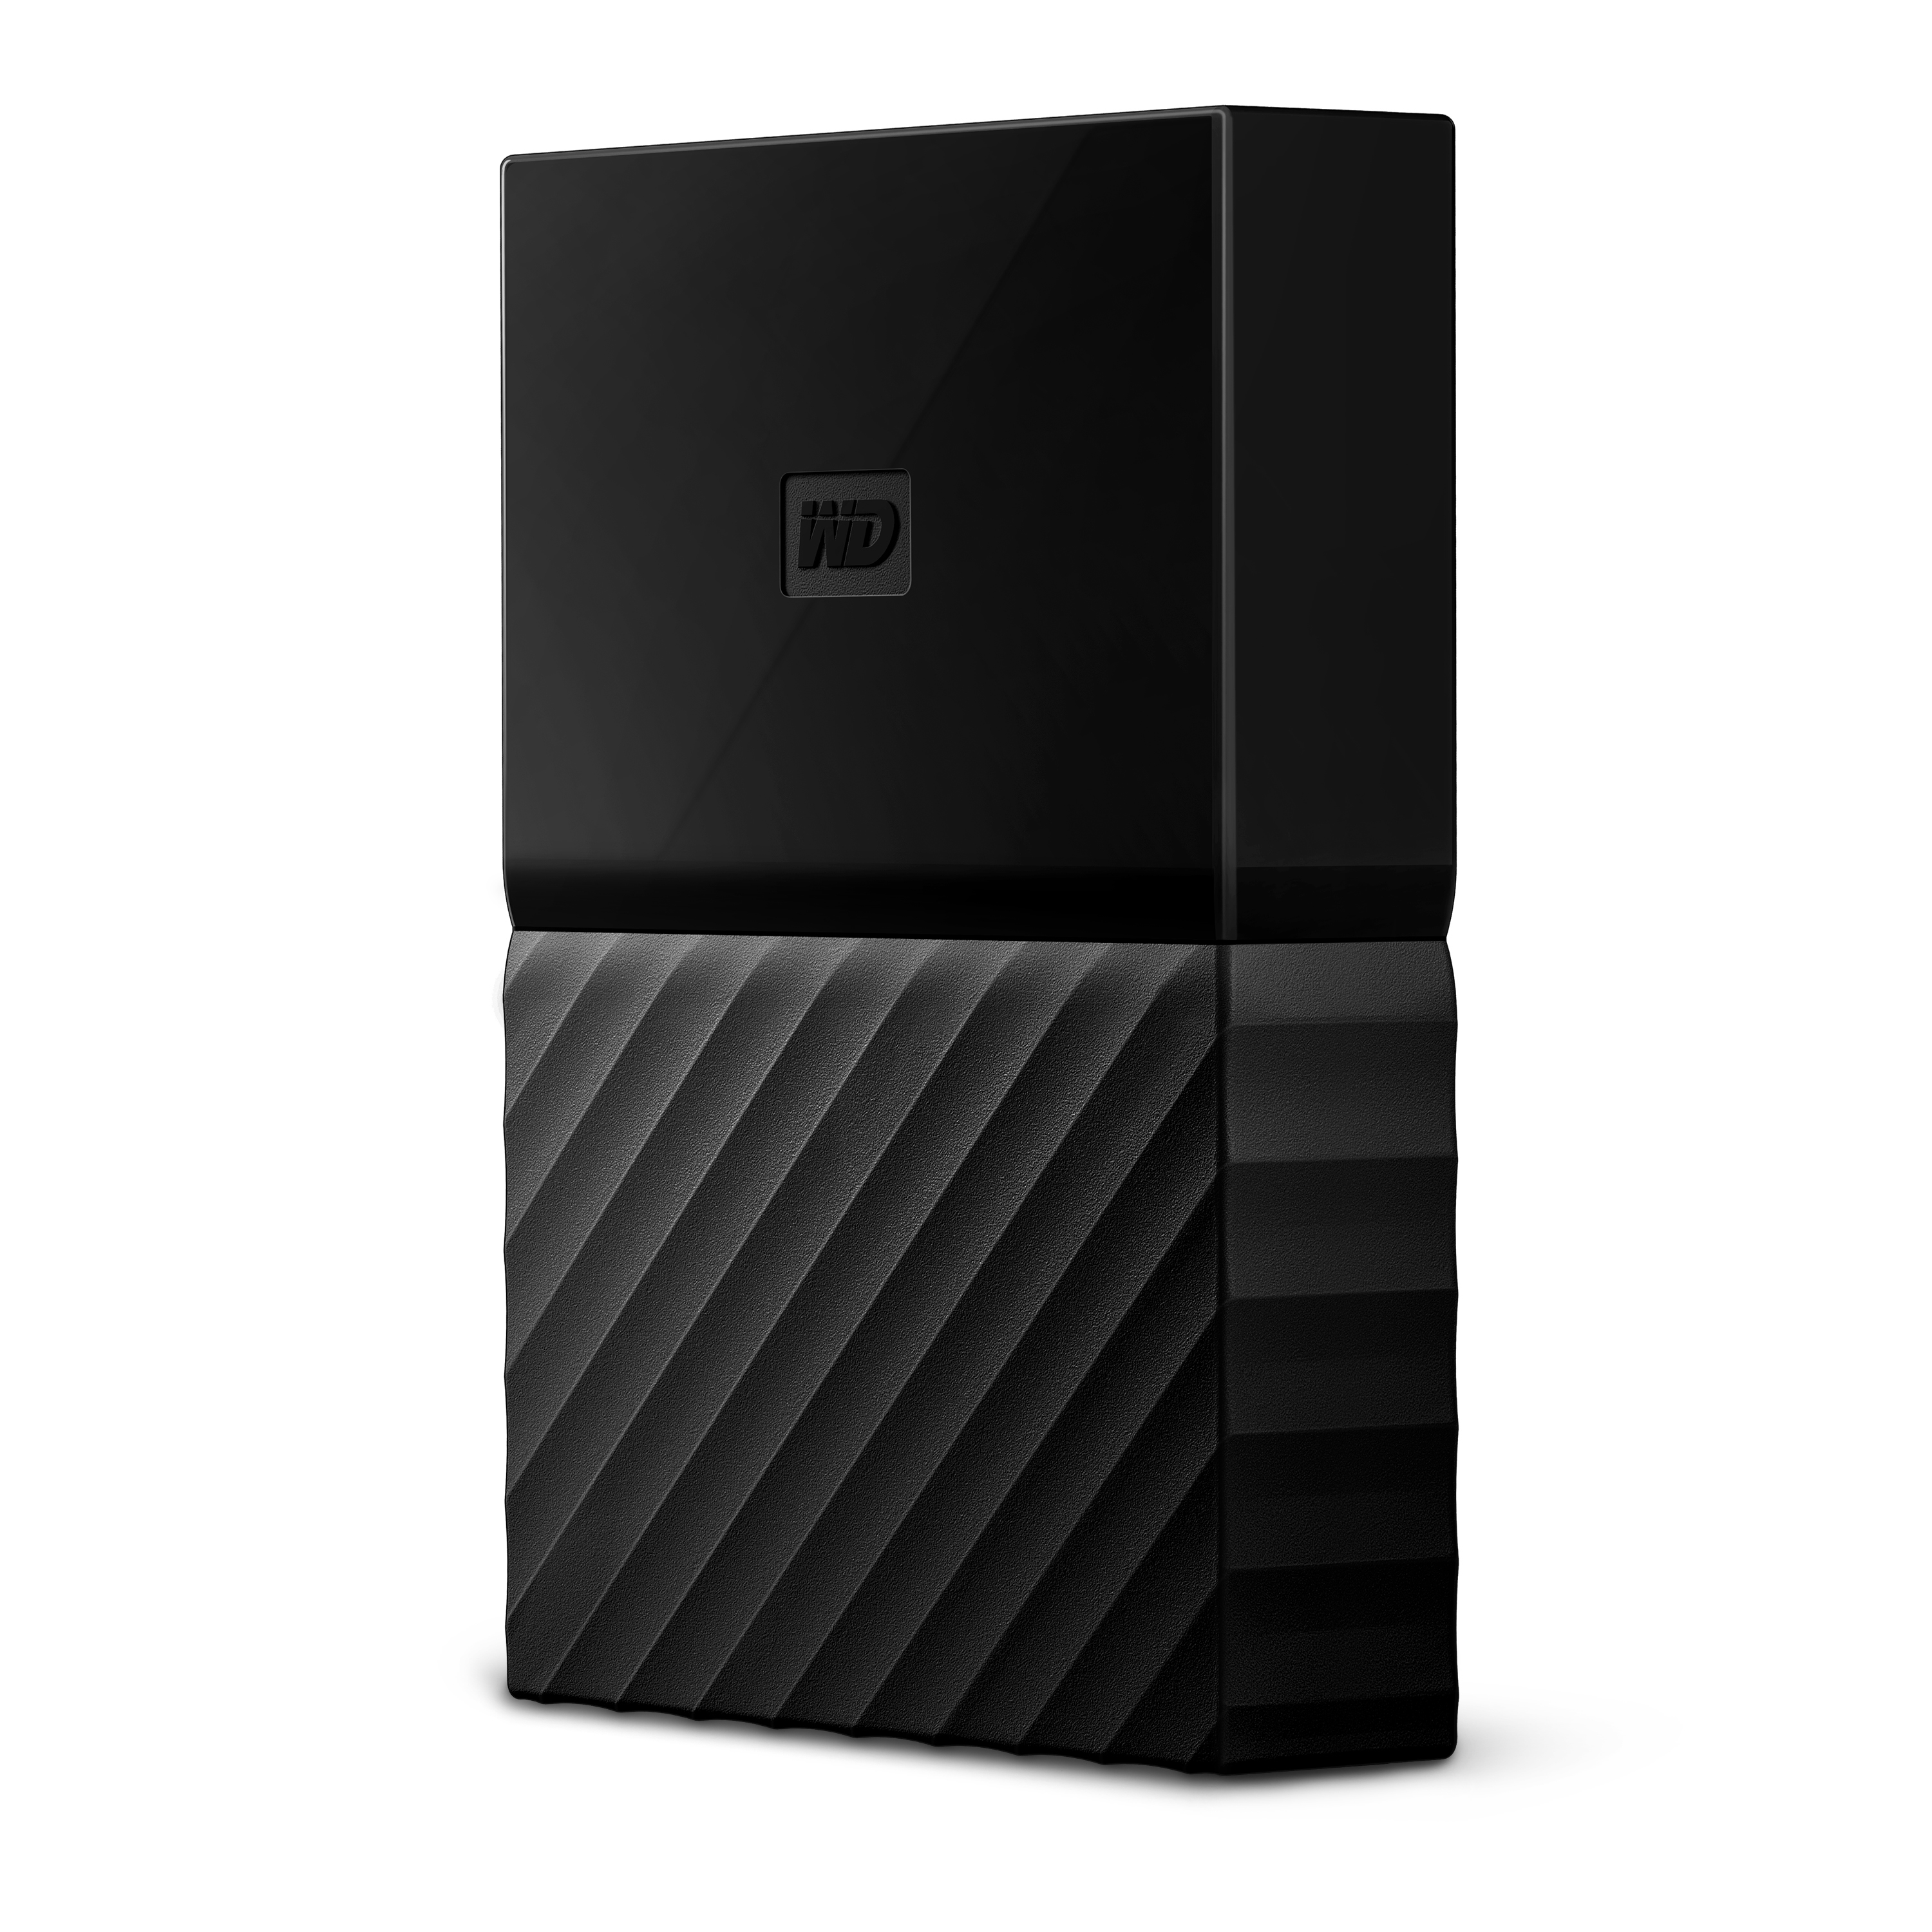 Western Digital My Passport 2TB Black with Type C Cable External Hard Drive for Mac